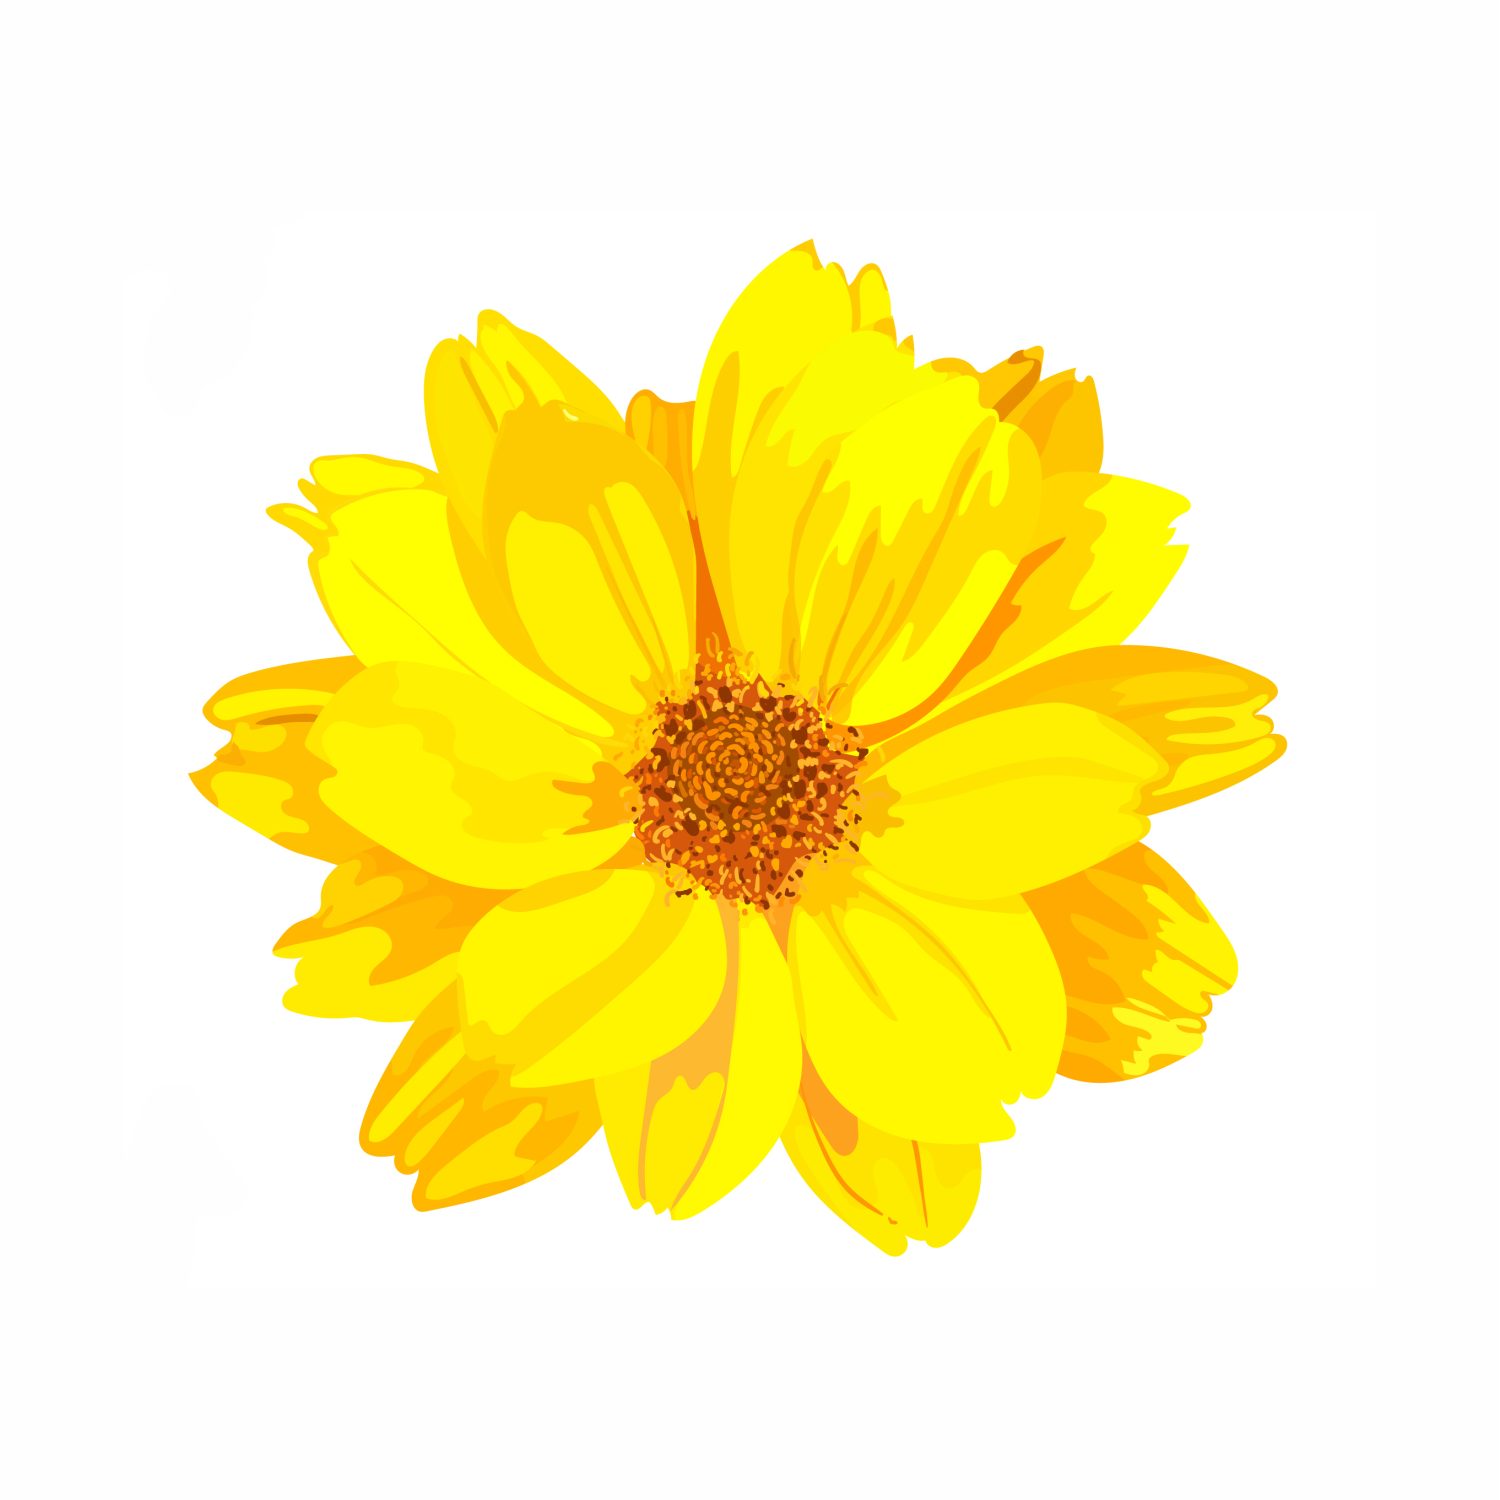 Chrysanthellum Indicum (Golden Chamomile) Extract: A Soothing and Brightening Ingredient for Your Skin